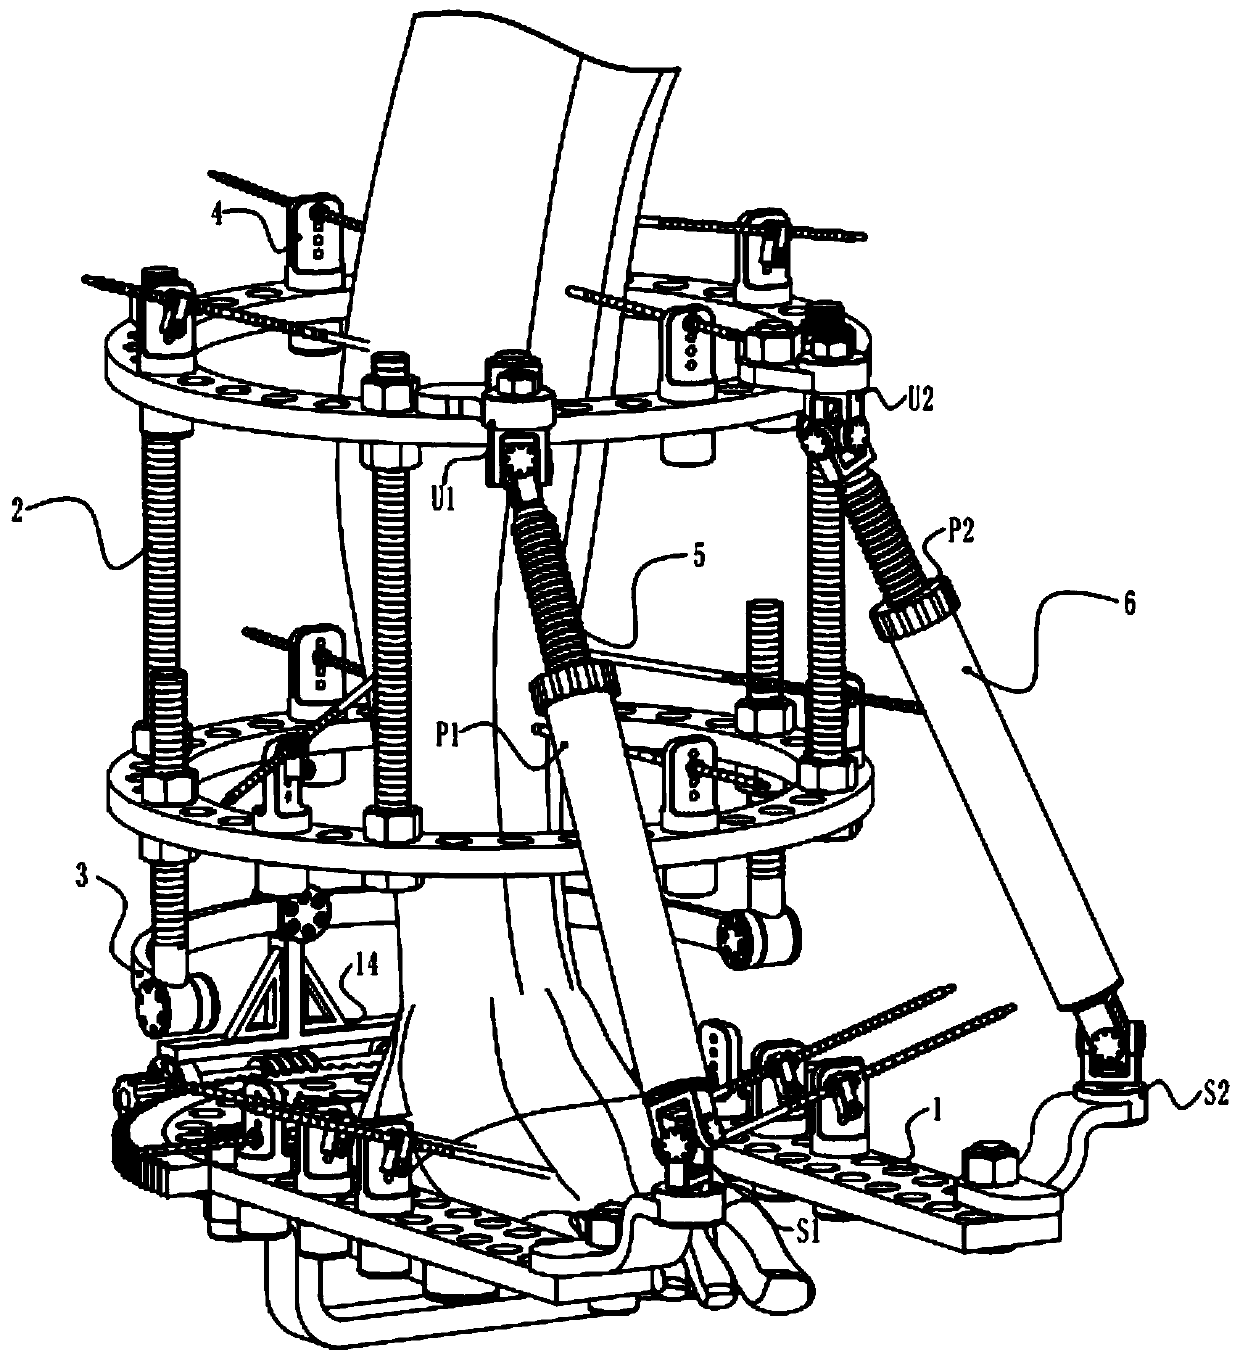 An ankle-foot external fixation device for correcting clubfoot deformity